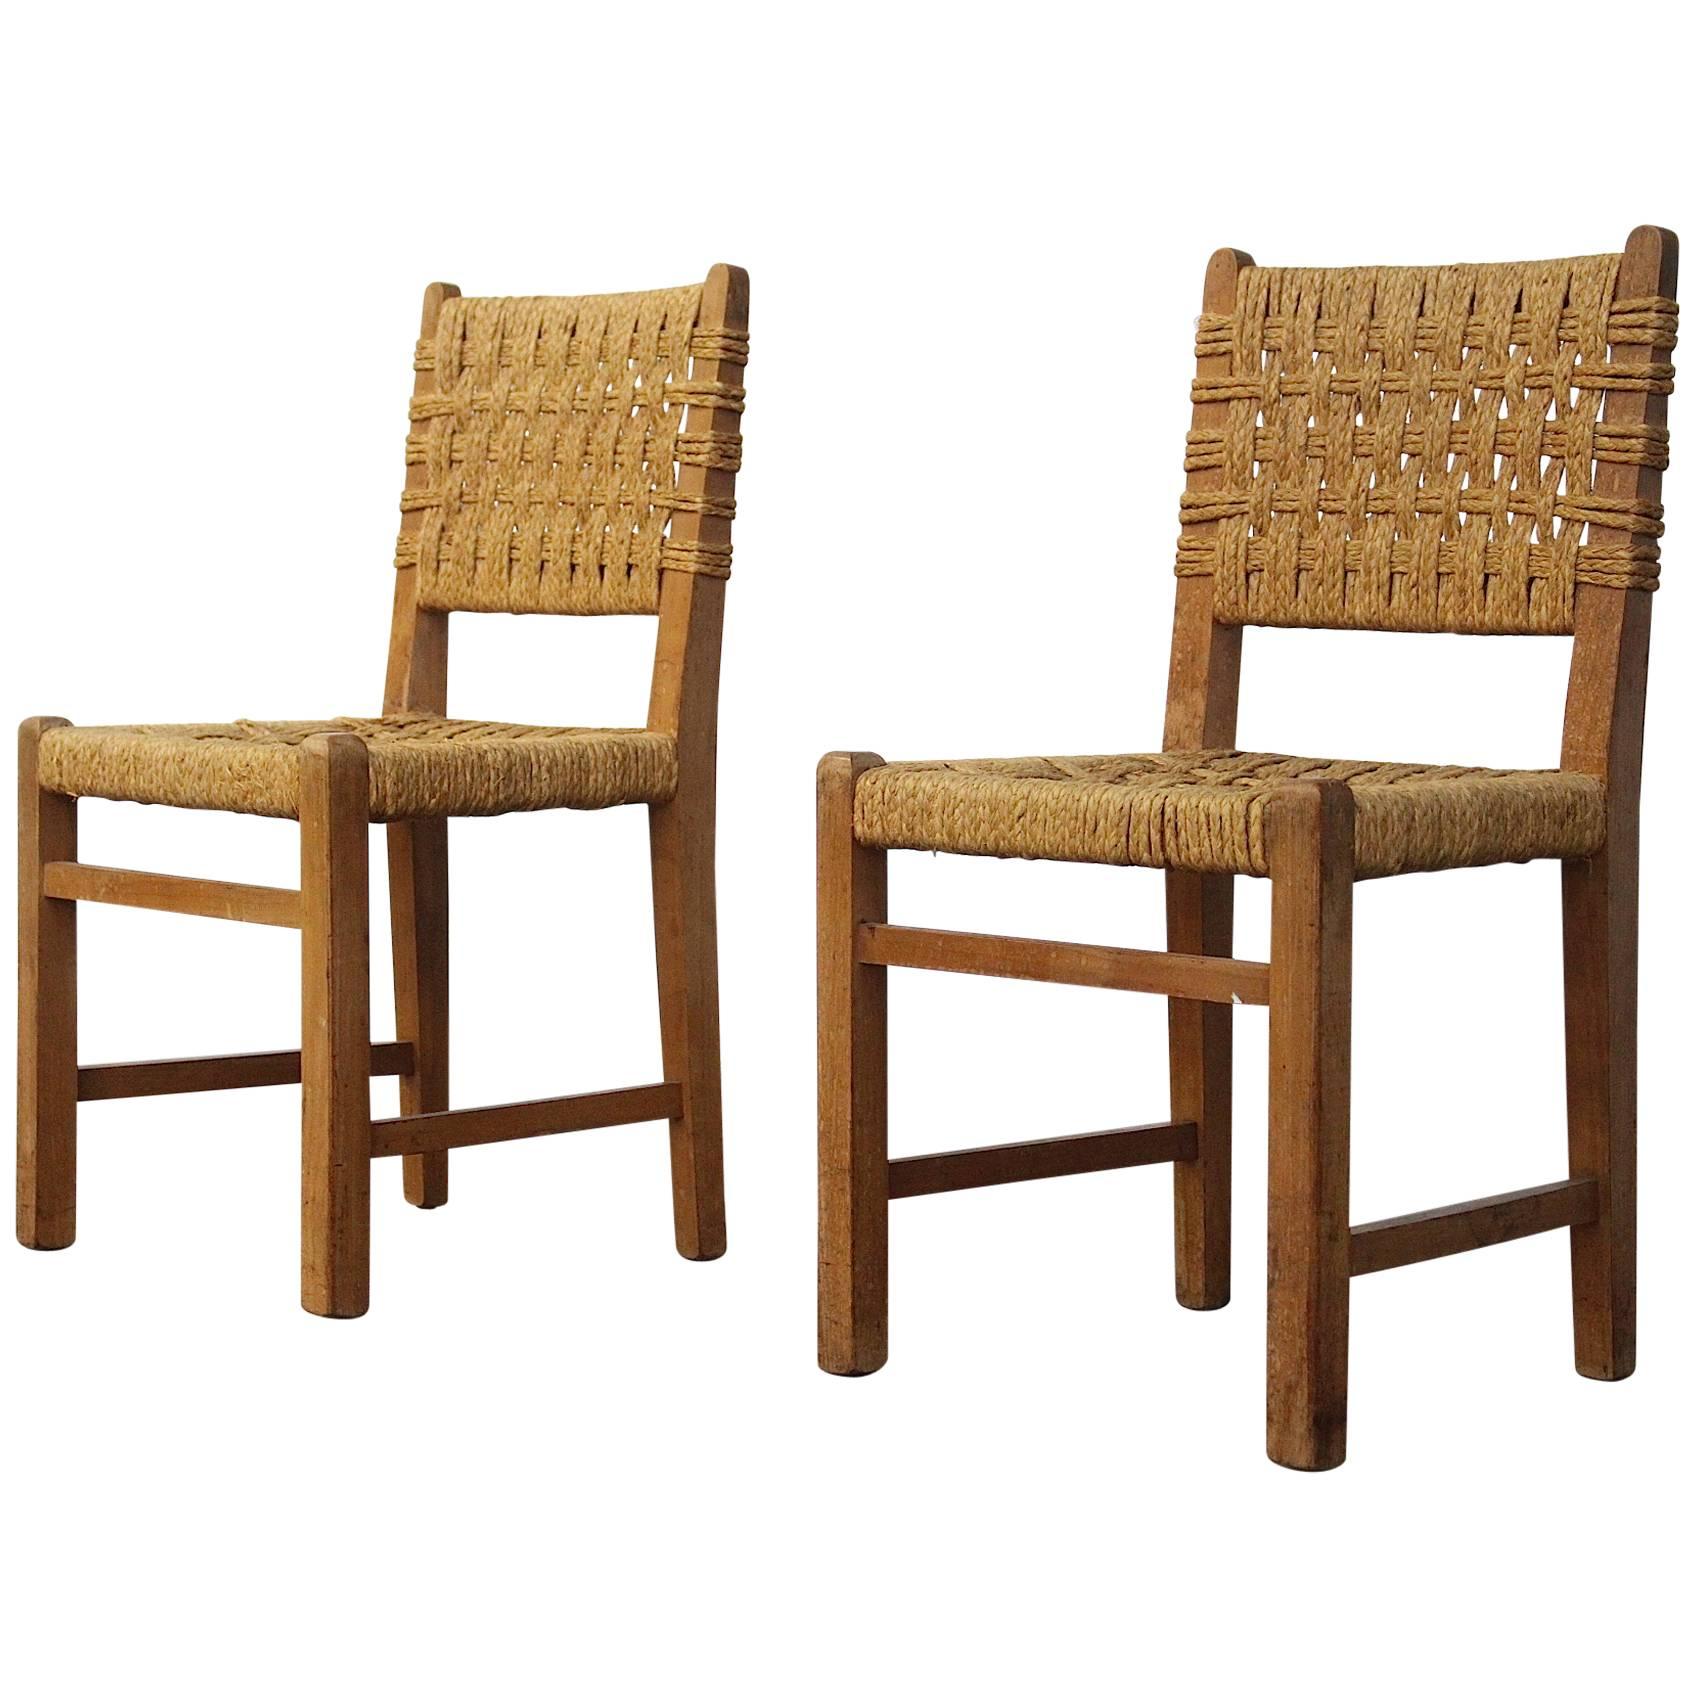 Very Rare Pair of Side Chairs by Audoux et Minet Sisal Rope for Vibo Vesoul